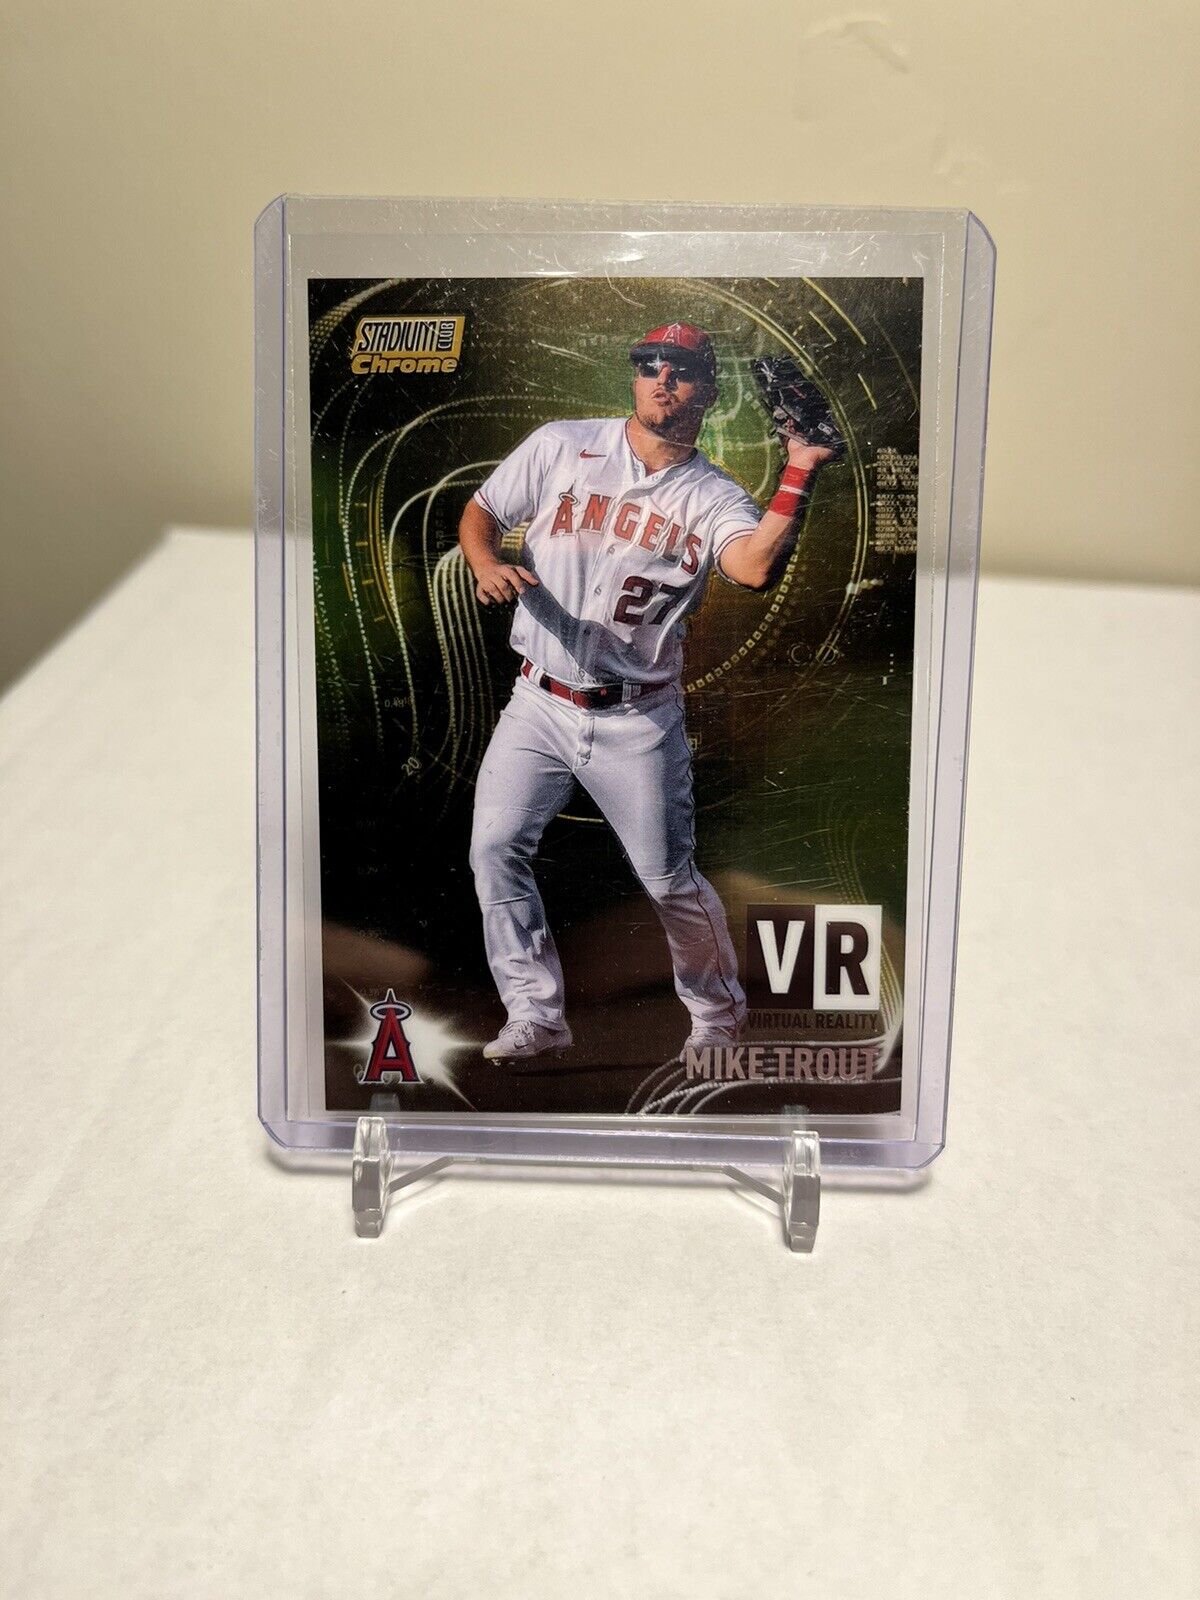 2021 Topps Stadium Chrome MIKE TROUT VR Gold Parallel #/50  Angels 